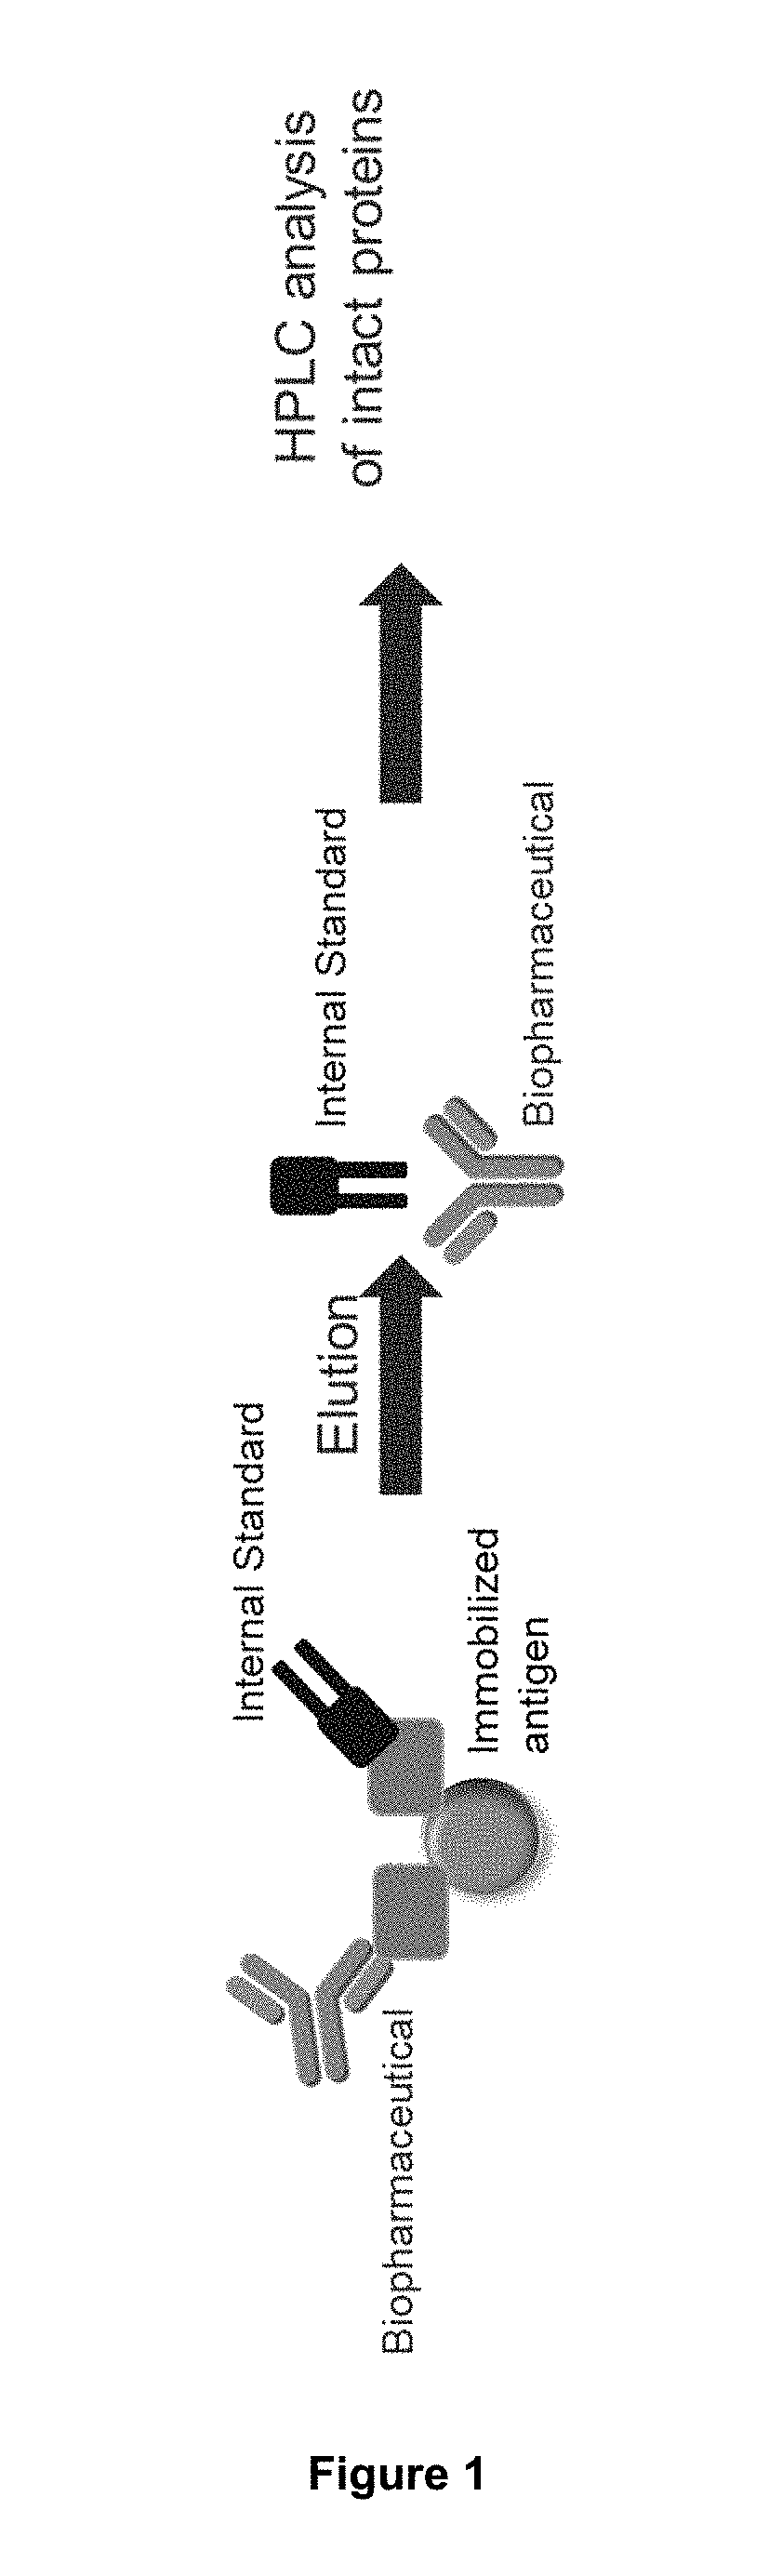 Methods of Mapping Protein Variants